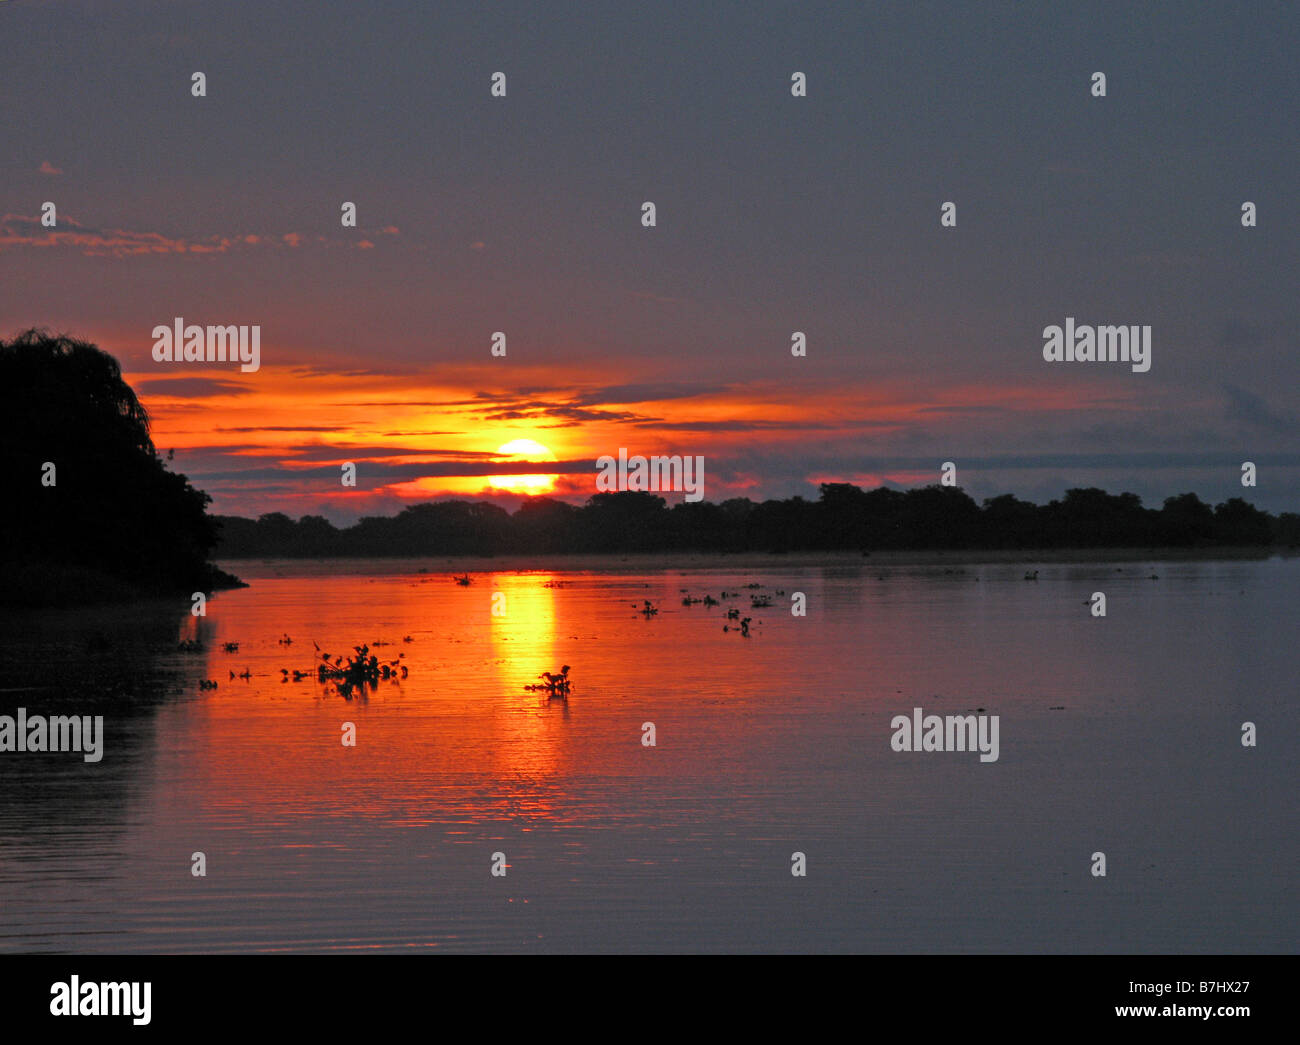 Sunset on Congo River with clumps of water hyacinth floating Democratic Republic of Congo Stock Photo